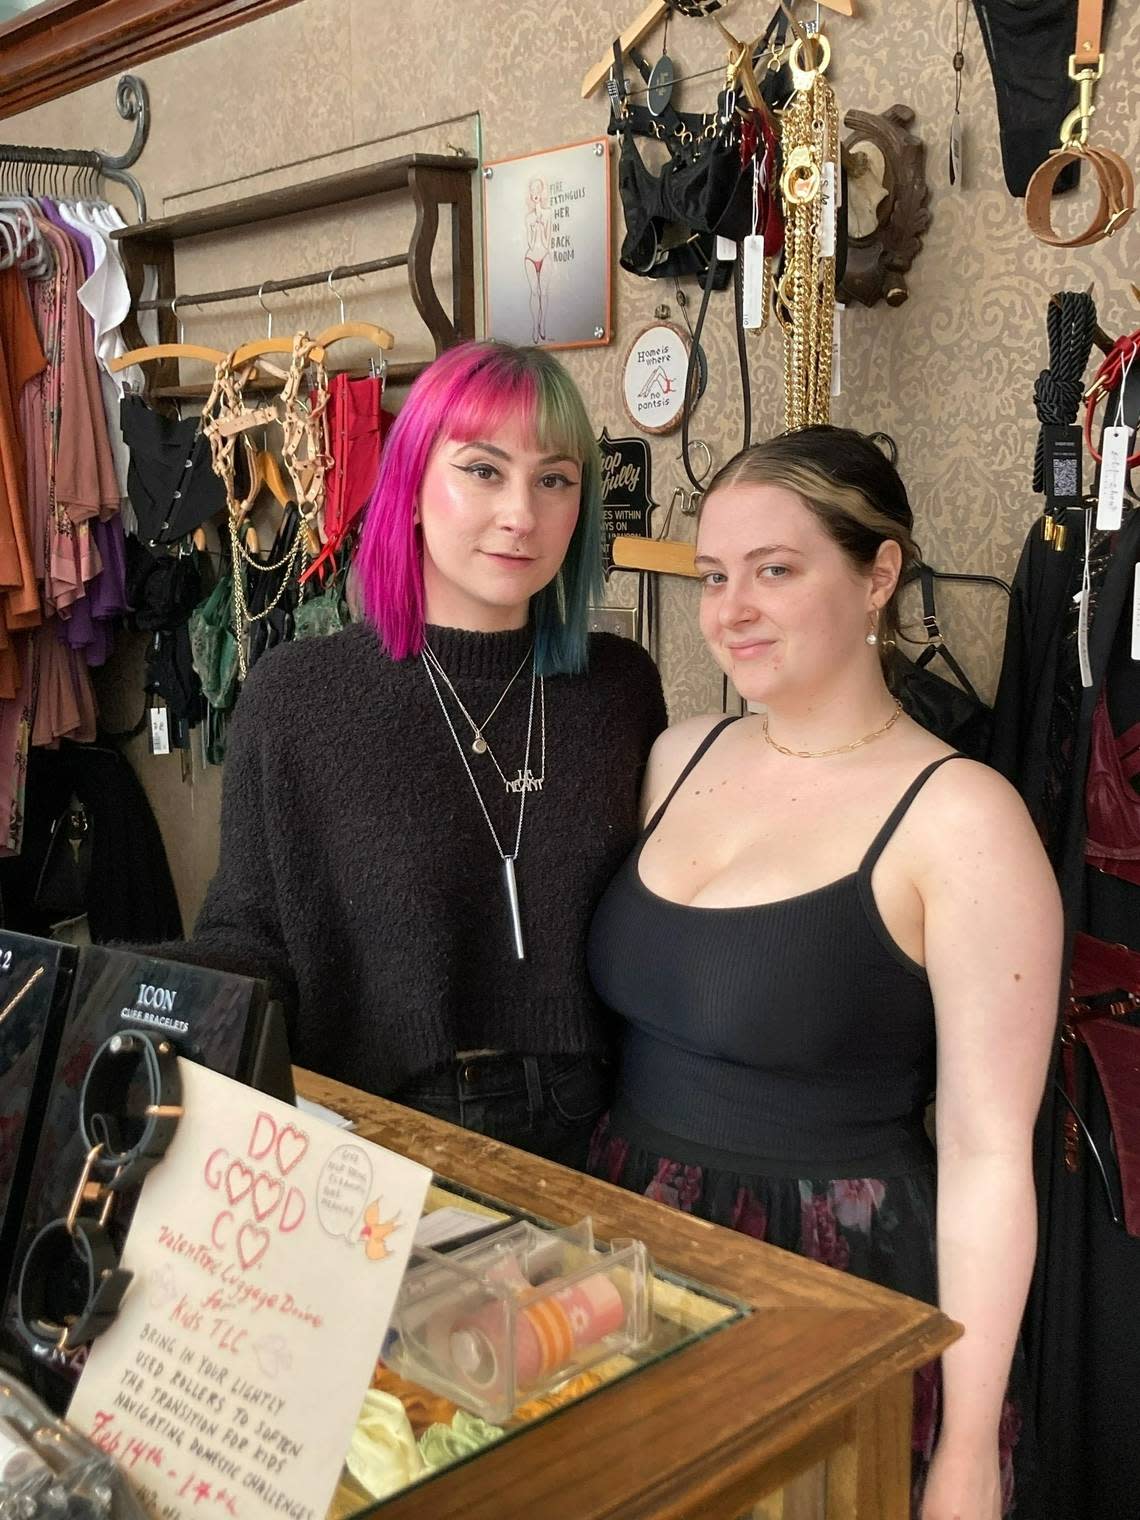 Kasey Burmood, 34, and Peyton West, 26, sell lingerie at Birdies, a shop celebrating its 21st anniversary on Valentine’s Day, Wednesday, Feb. 14. “It would have been ideal if the parade could have been on Friday,” said owner Peregrine Honig. Eric Adler/eadler@kcstar.com